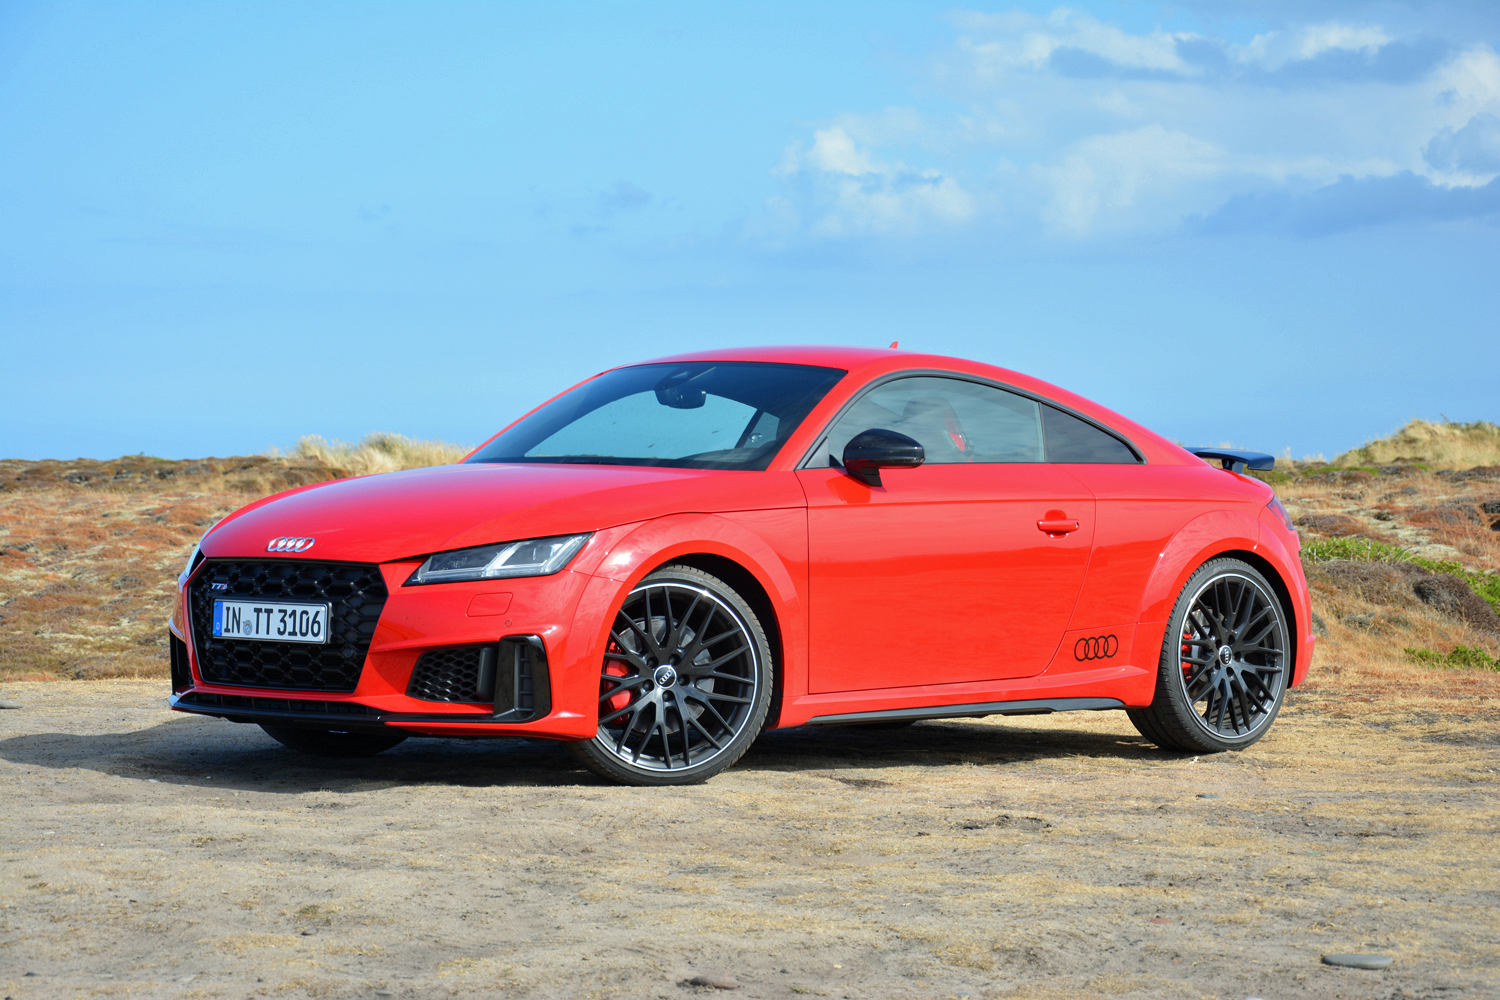 Audi TT Coupe (2014 - 2018) used car review, Car review